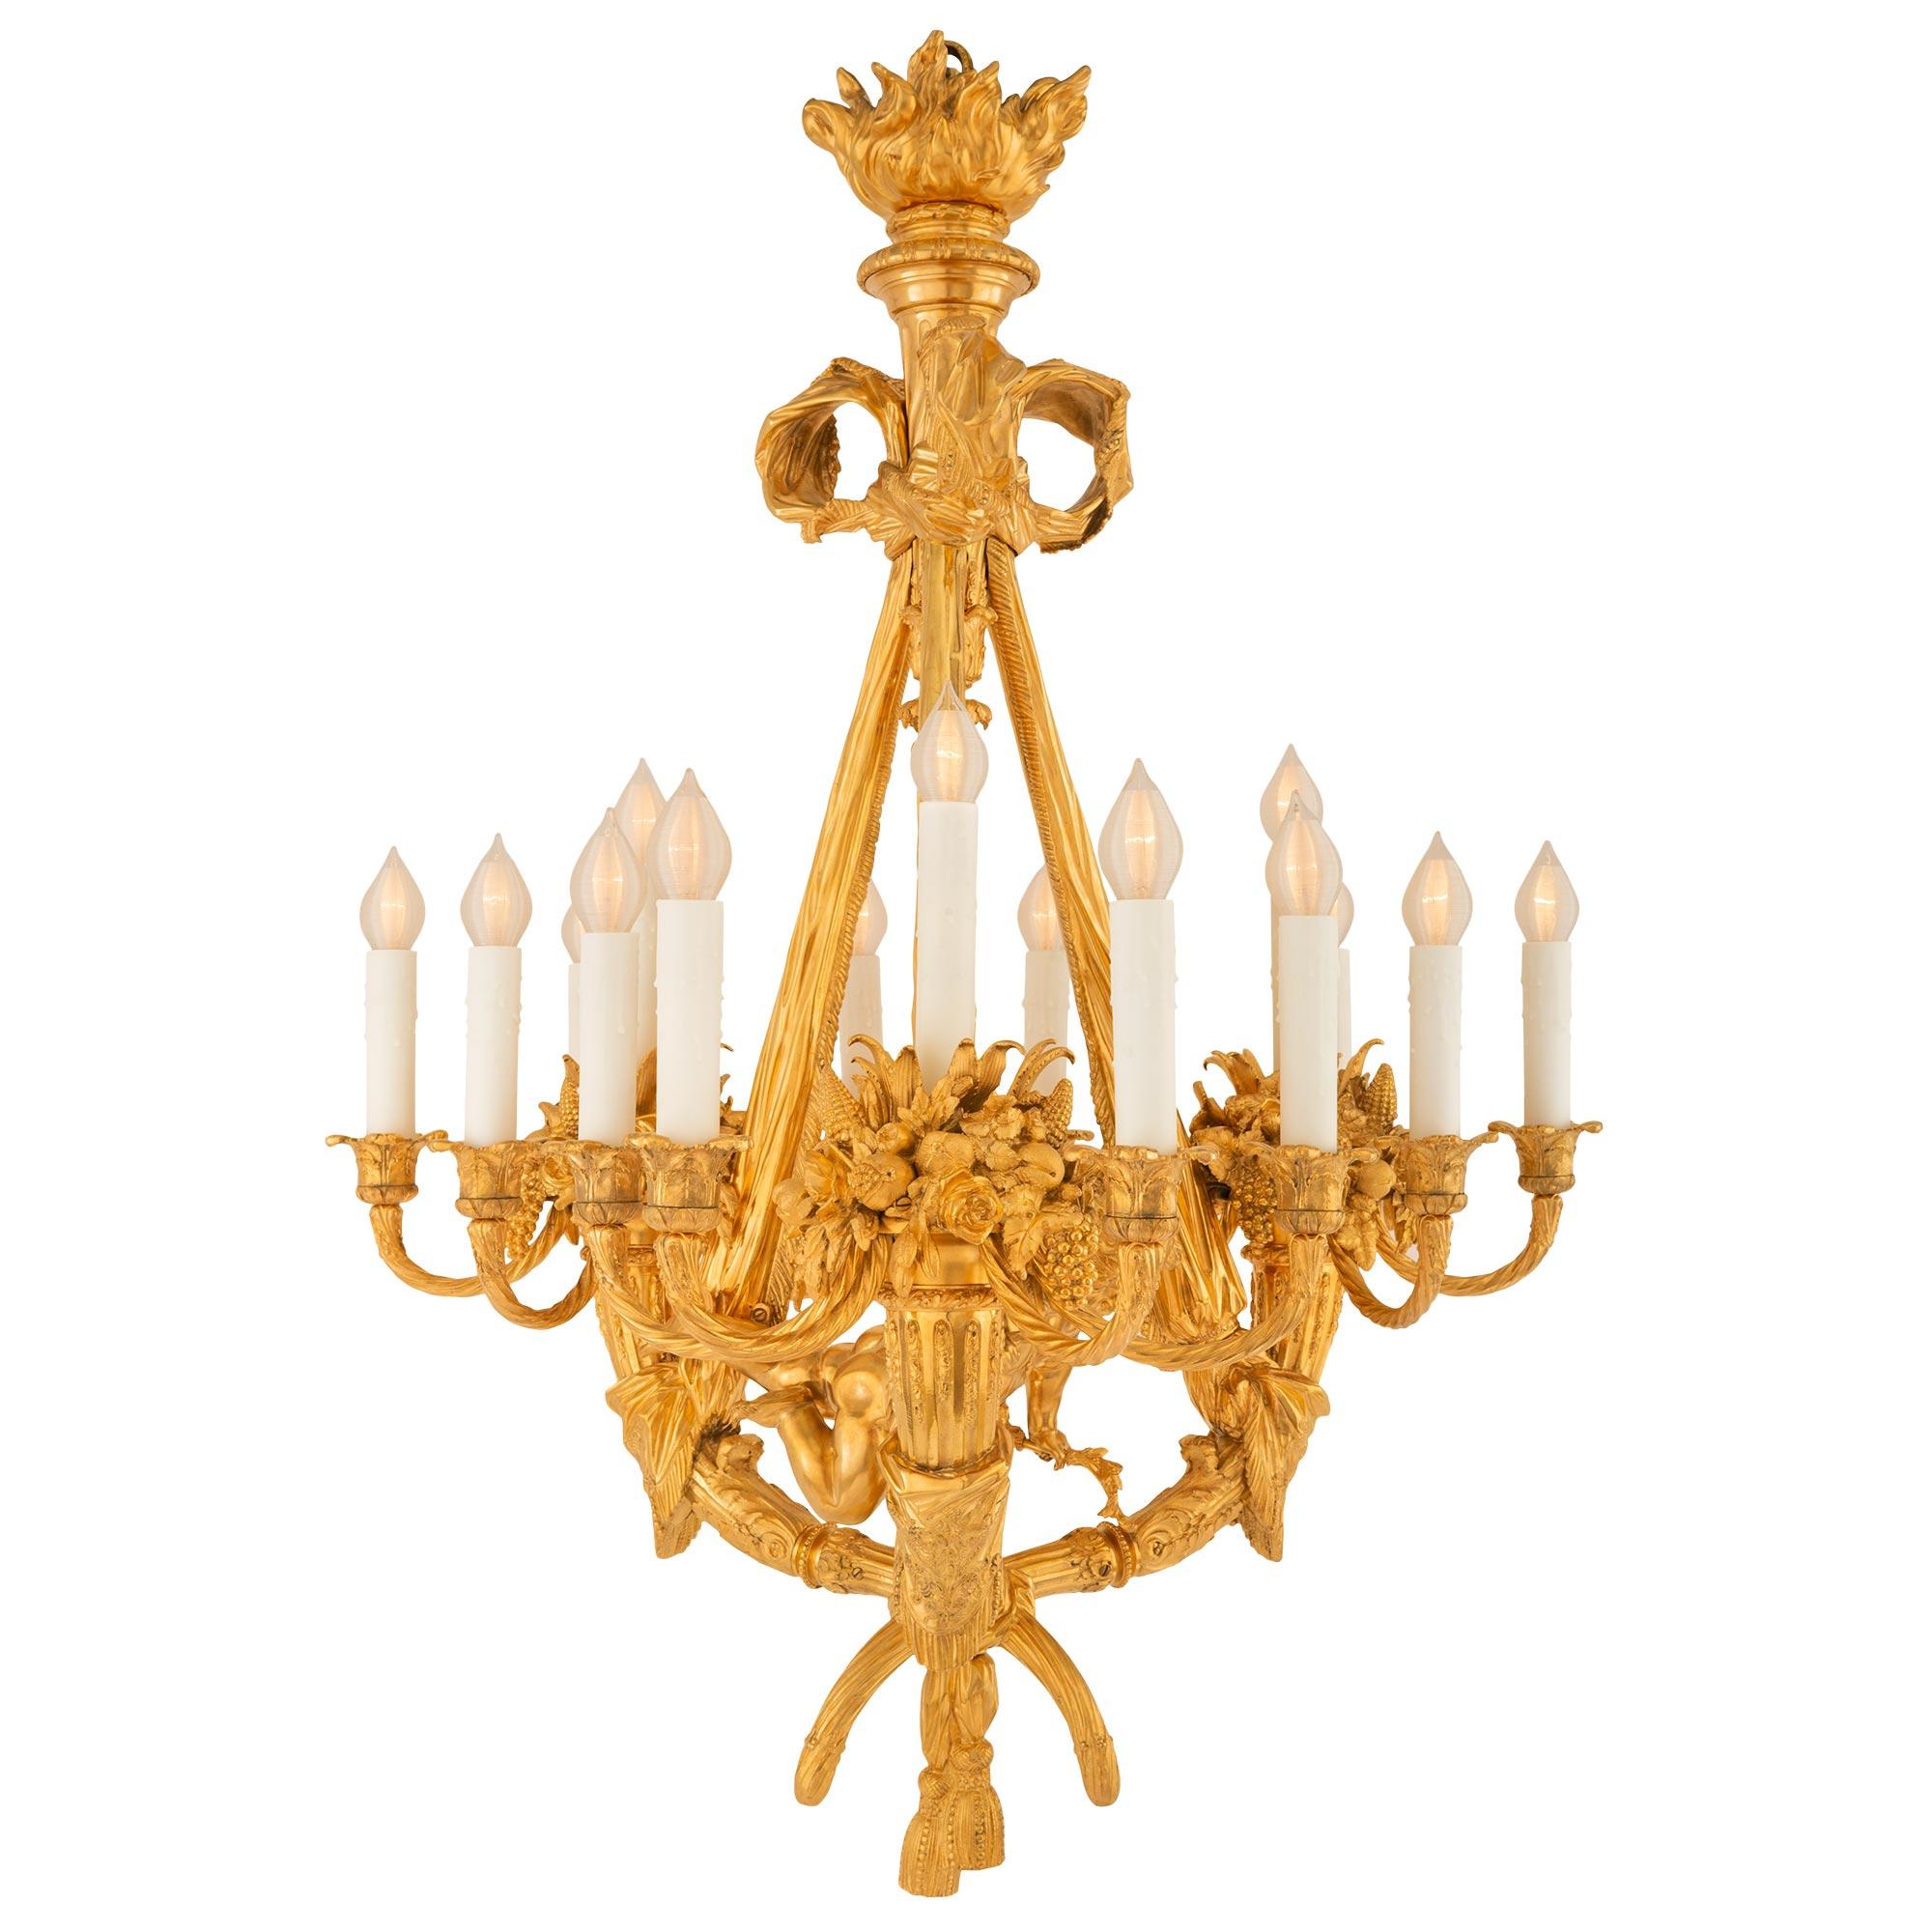 A spectacular and most impressive French 19th century Louis XVI st. ormolu chandelier. This important fifteen light chandelier is centered by striking and wonderfully executed tied garlands with charming finely detailed tassels tied at the center